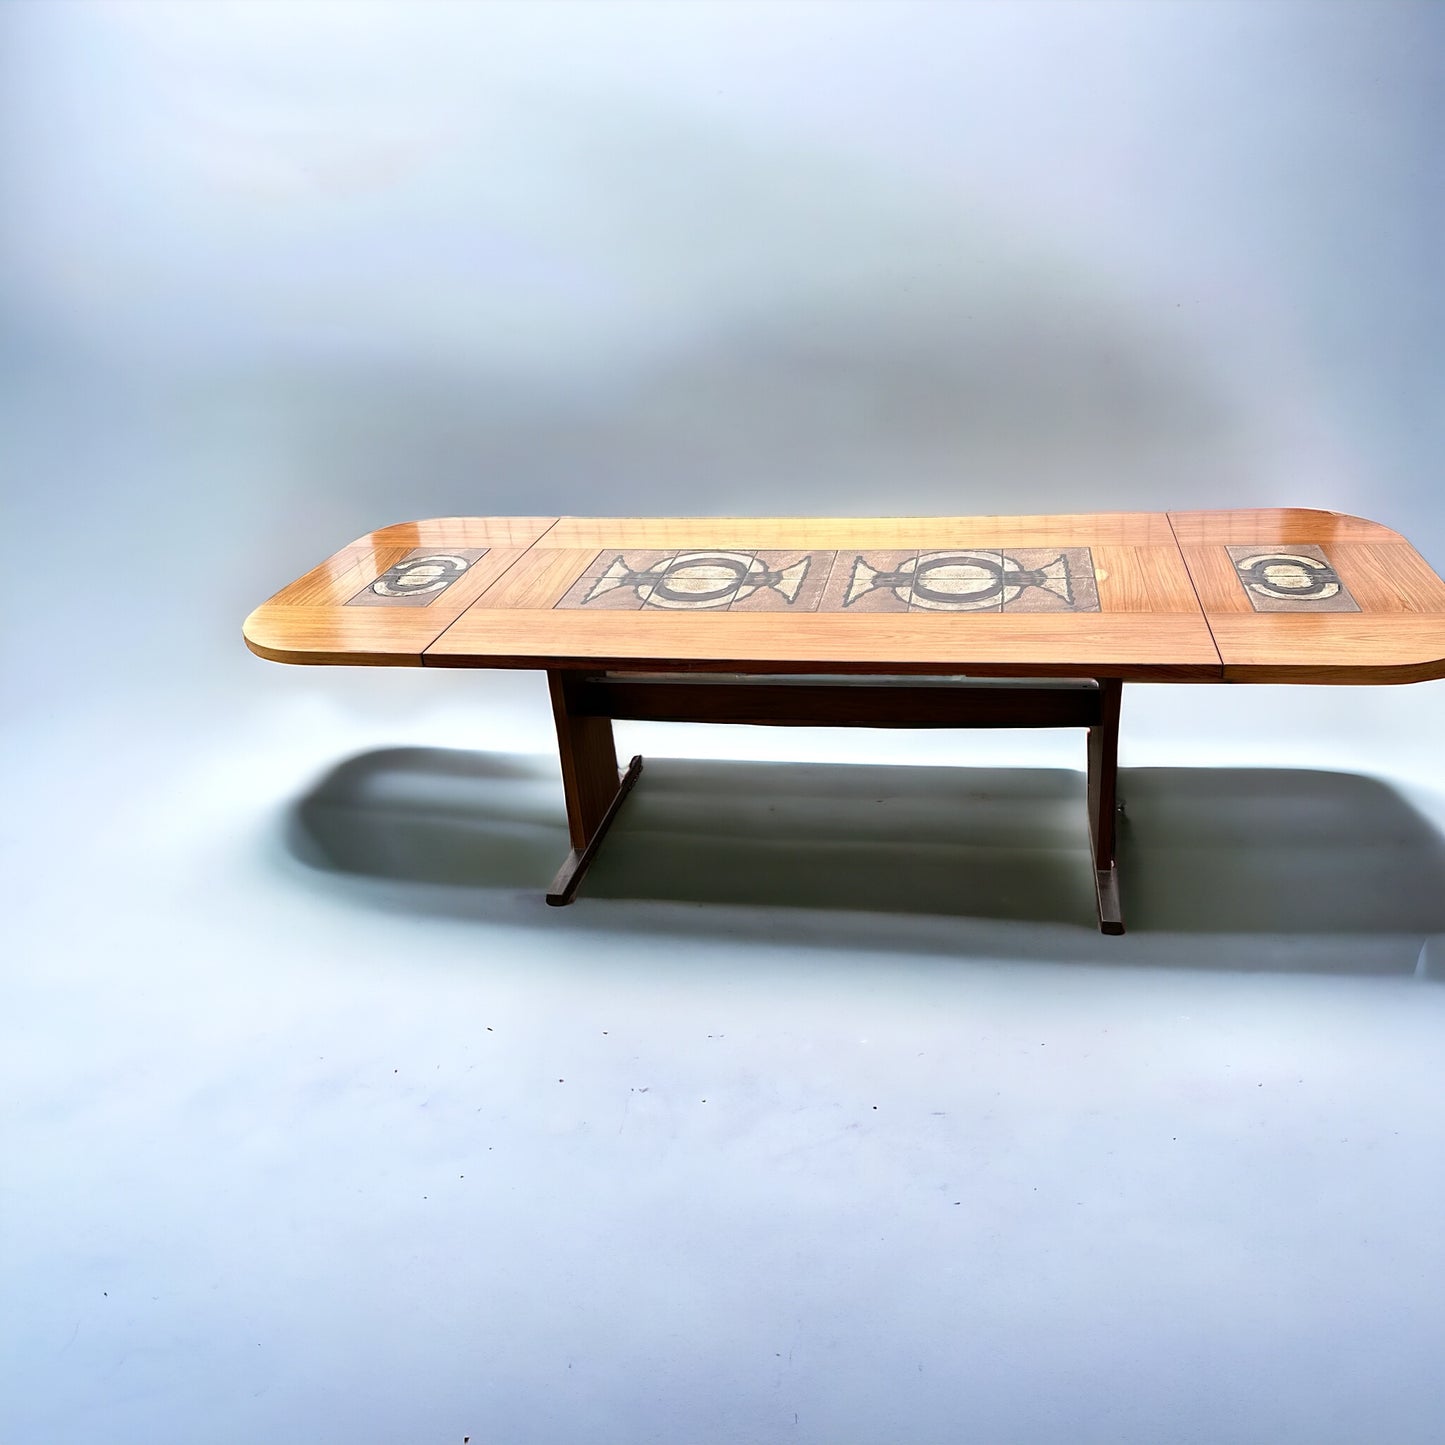 Large Dropleaf Dining Table with Tile Inset by Gangso Moble 1970s Poul Hermann Poulsen Design